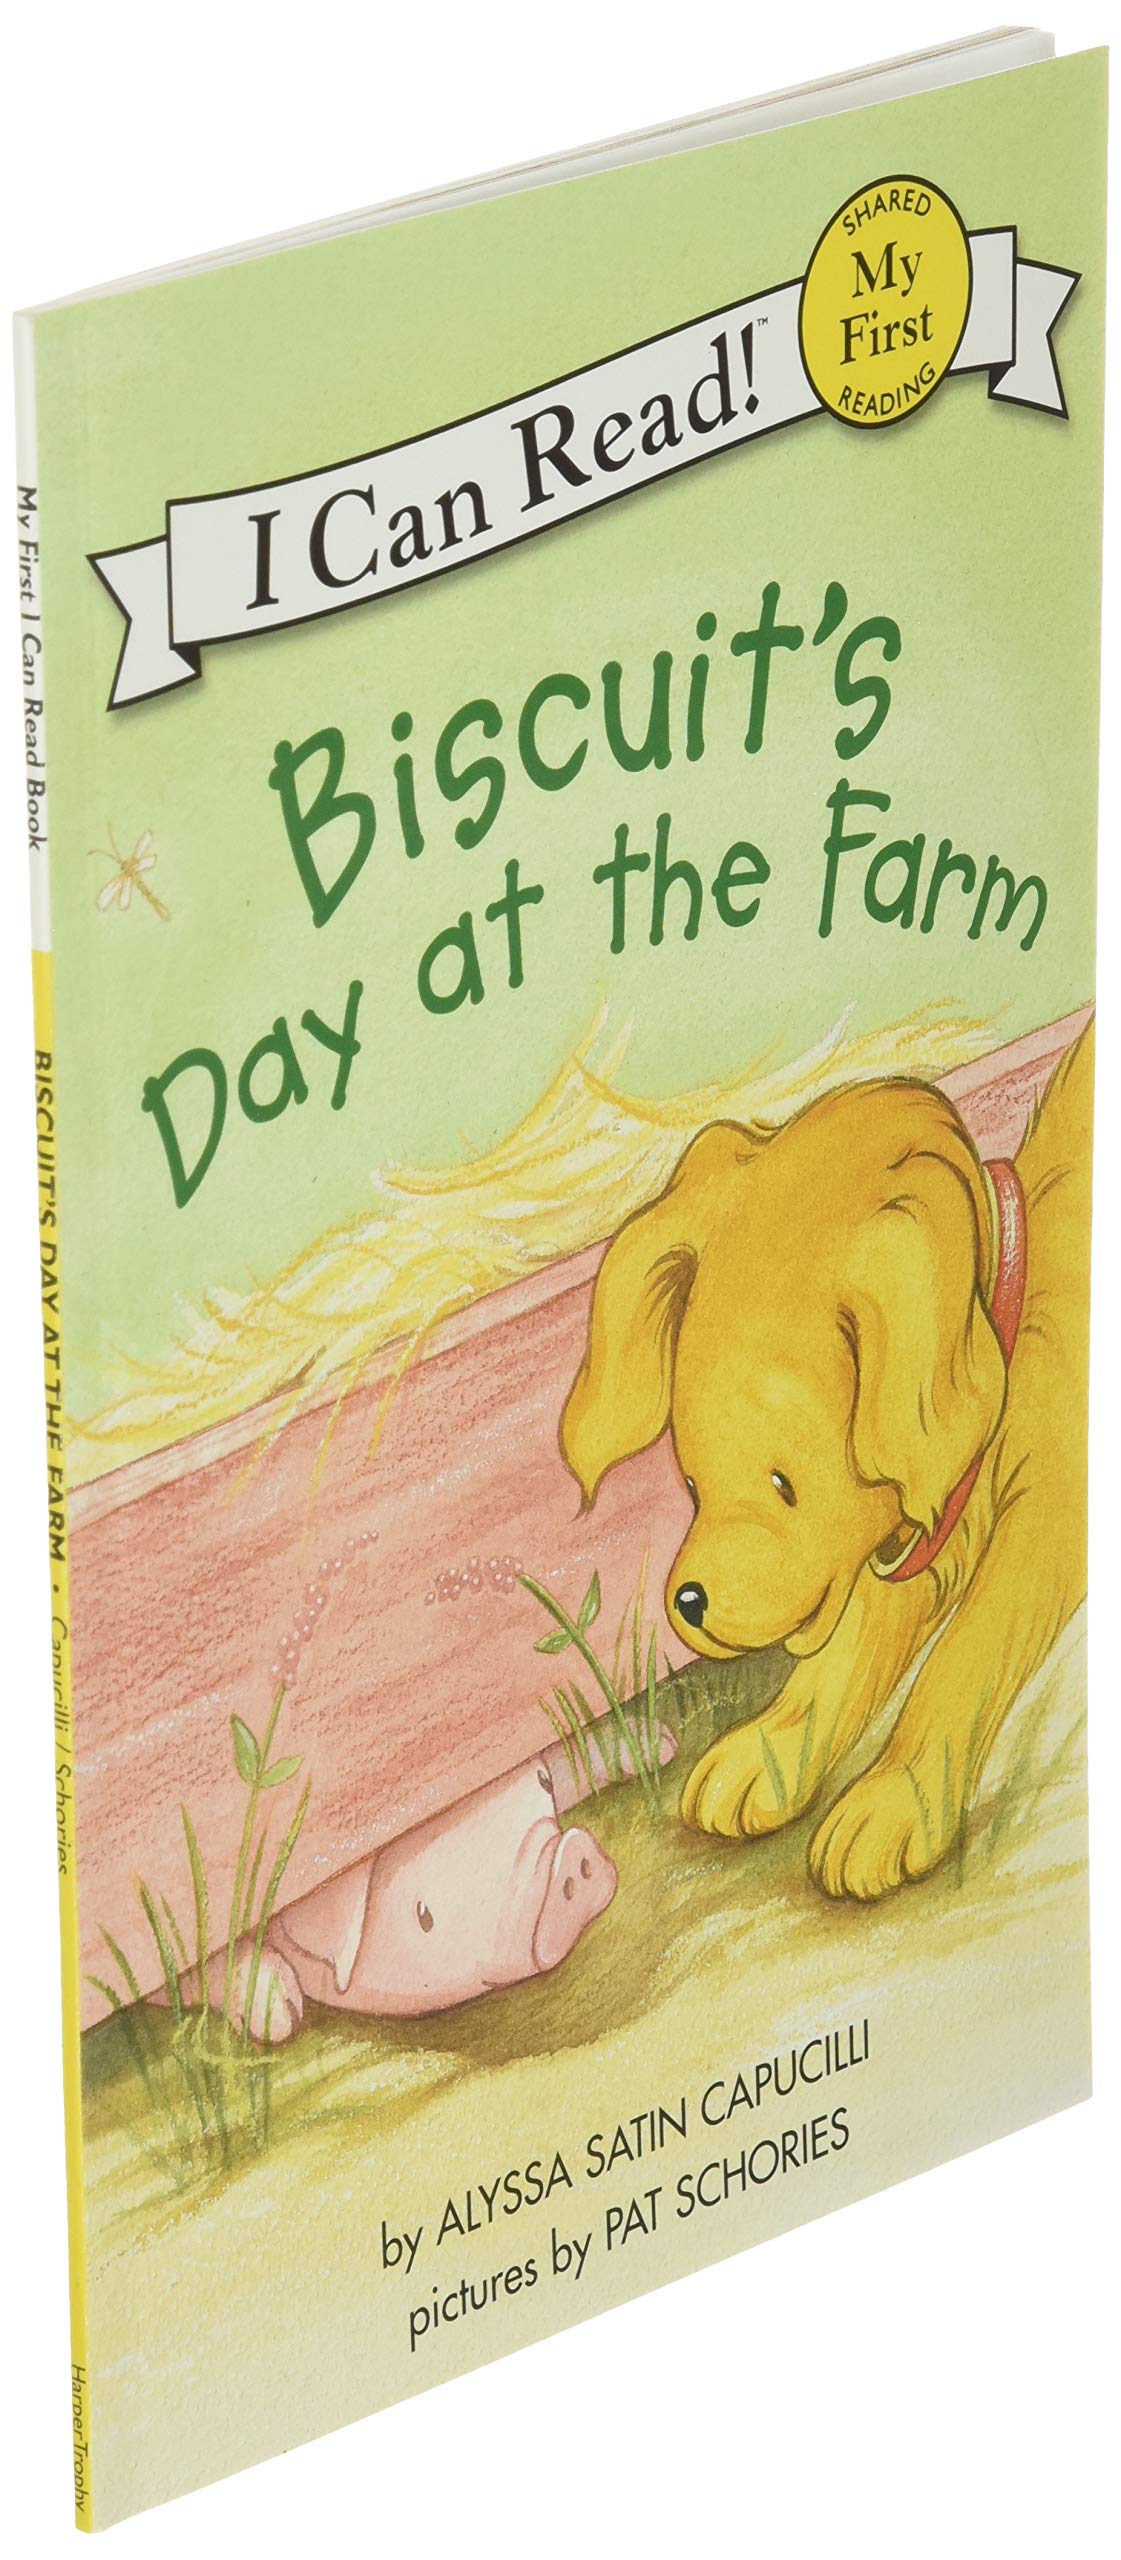 Biscuit's Day at the Farm (My First I Can Read)